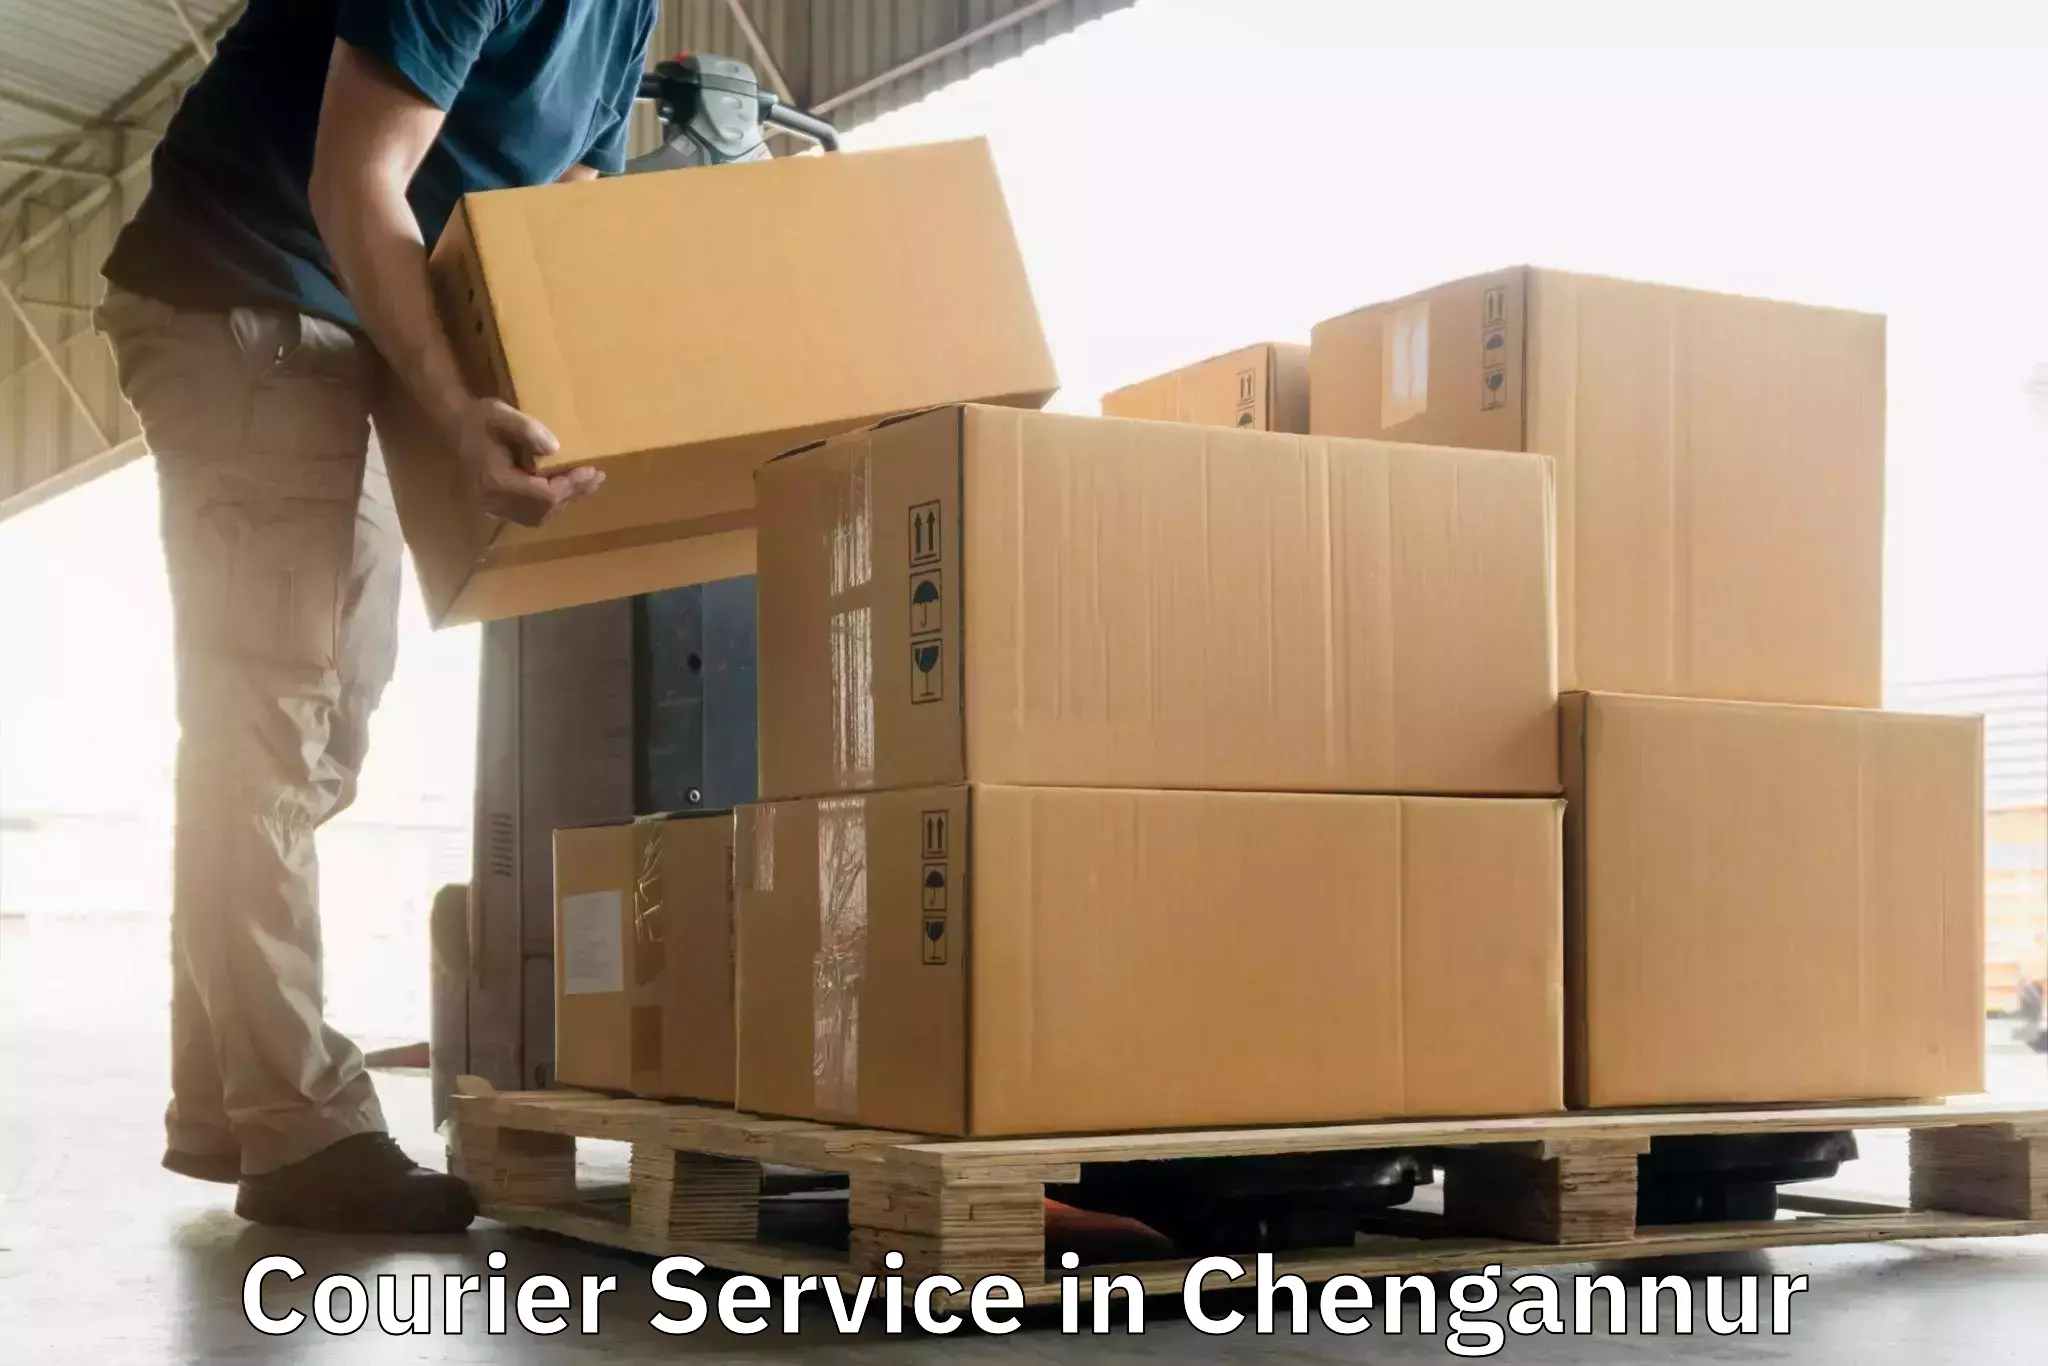 Global shipping networks in Chengannur